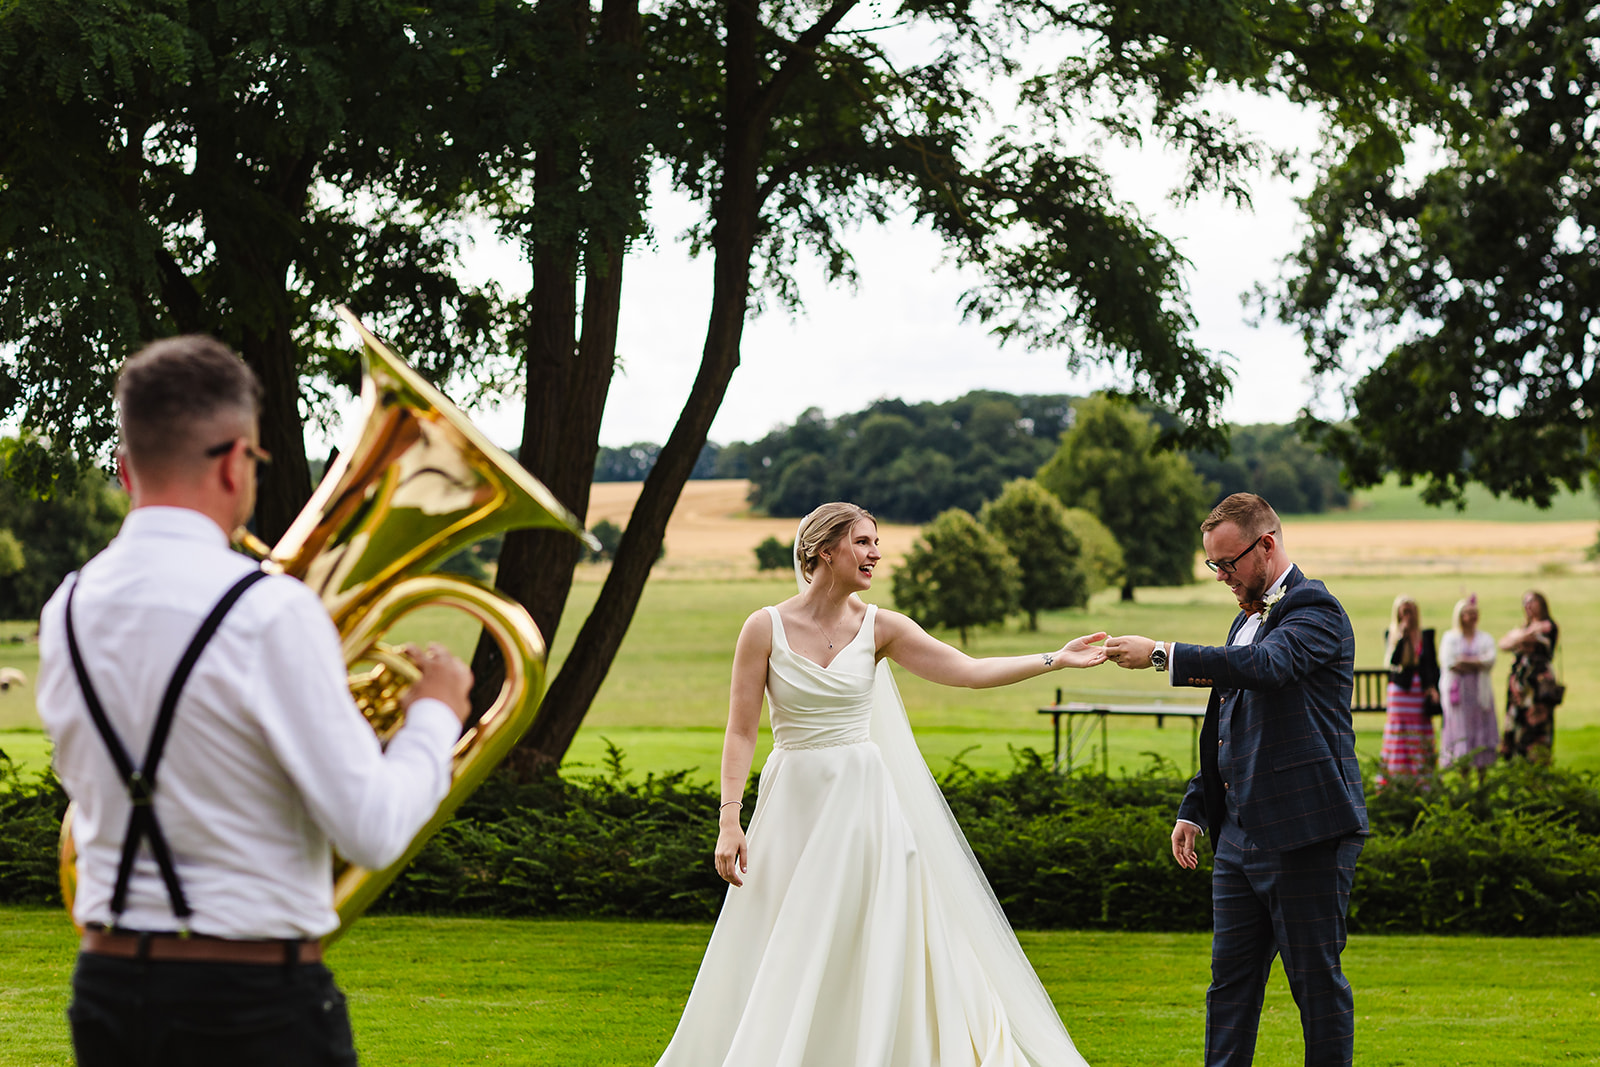 Bride and groom dancing at their wedding at Stapleford park by Amanda Forman Photography